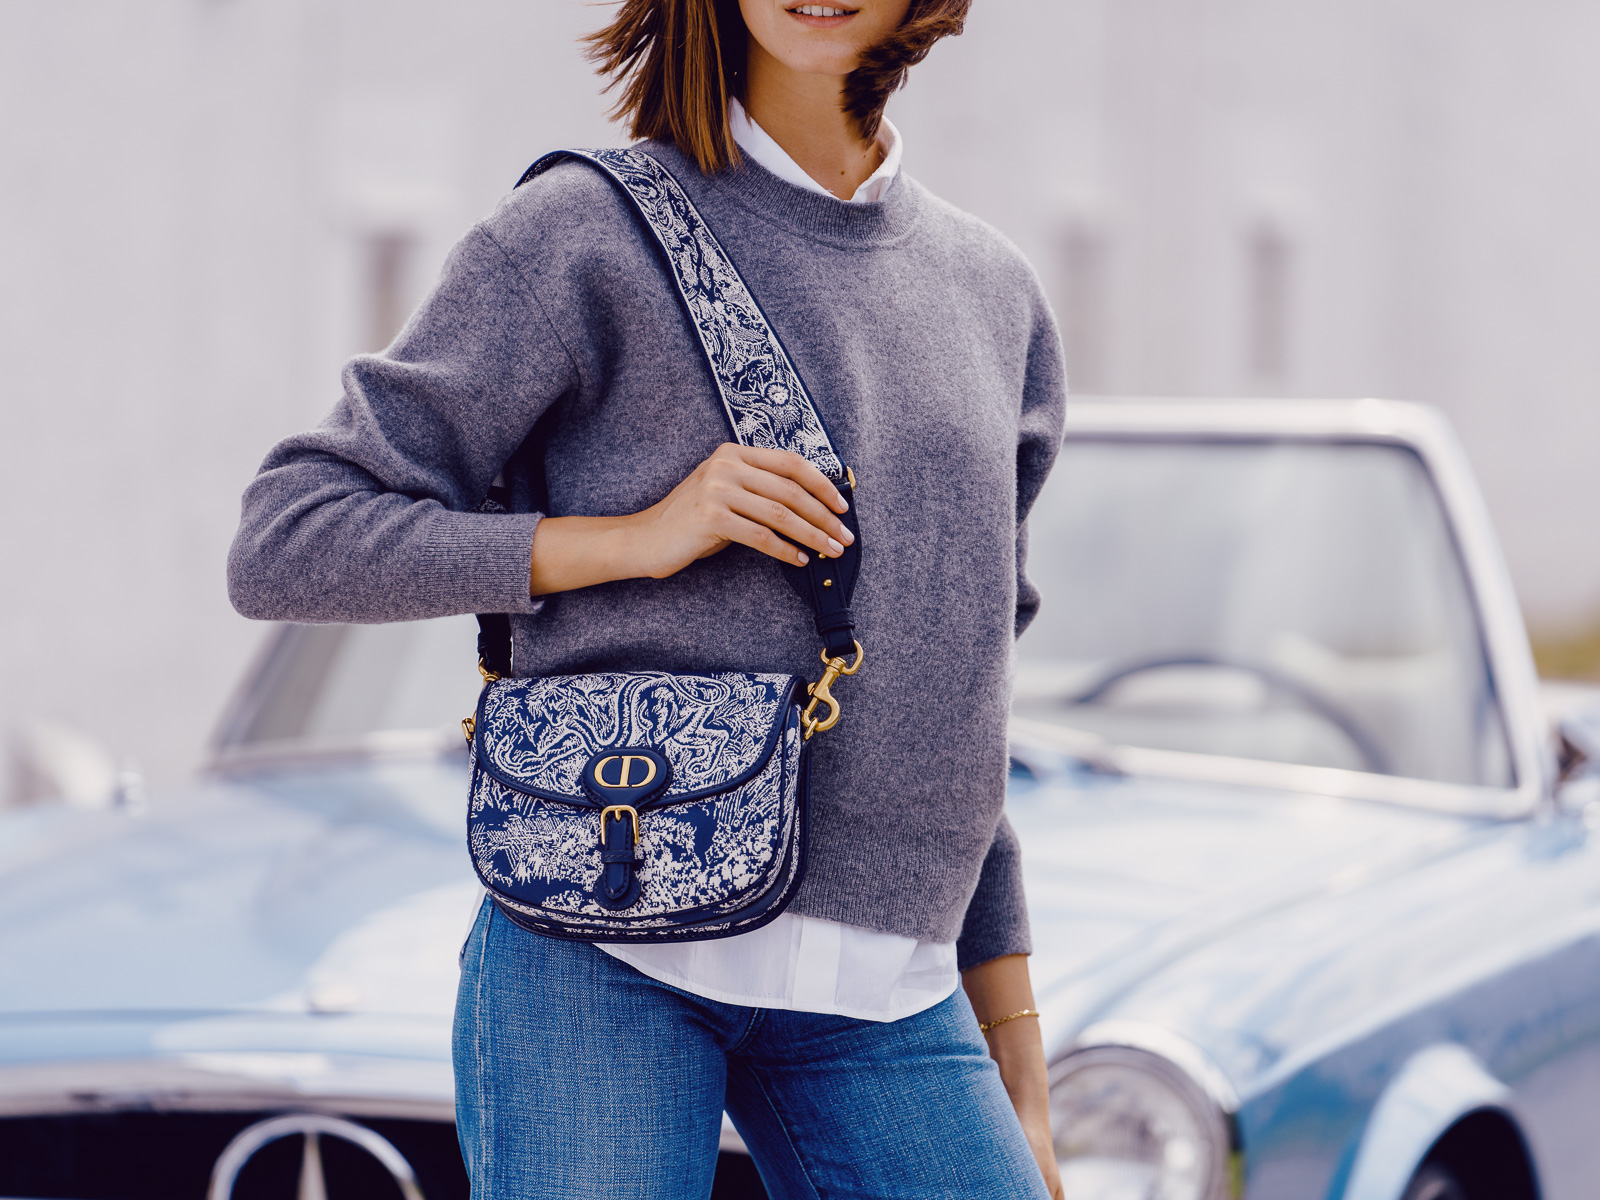 Dior 30 Montaigne  Women bags fashion, Street style bags, Blue bag outfit